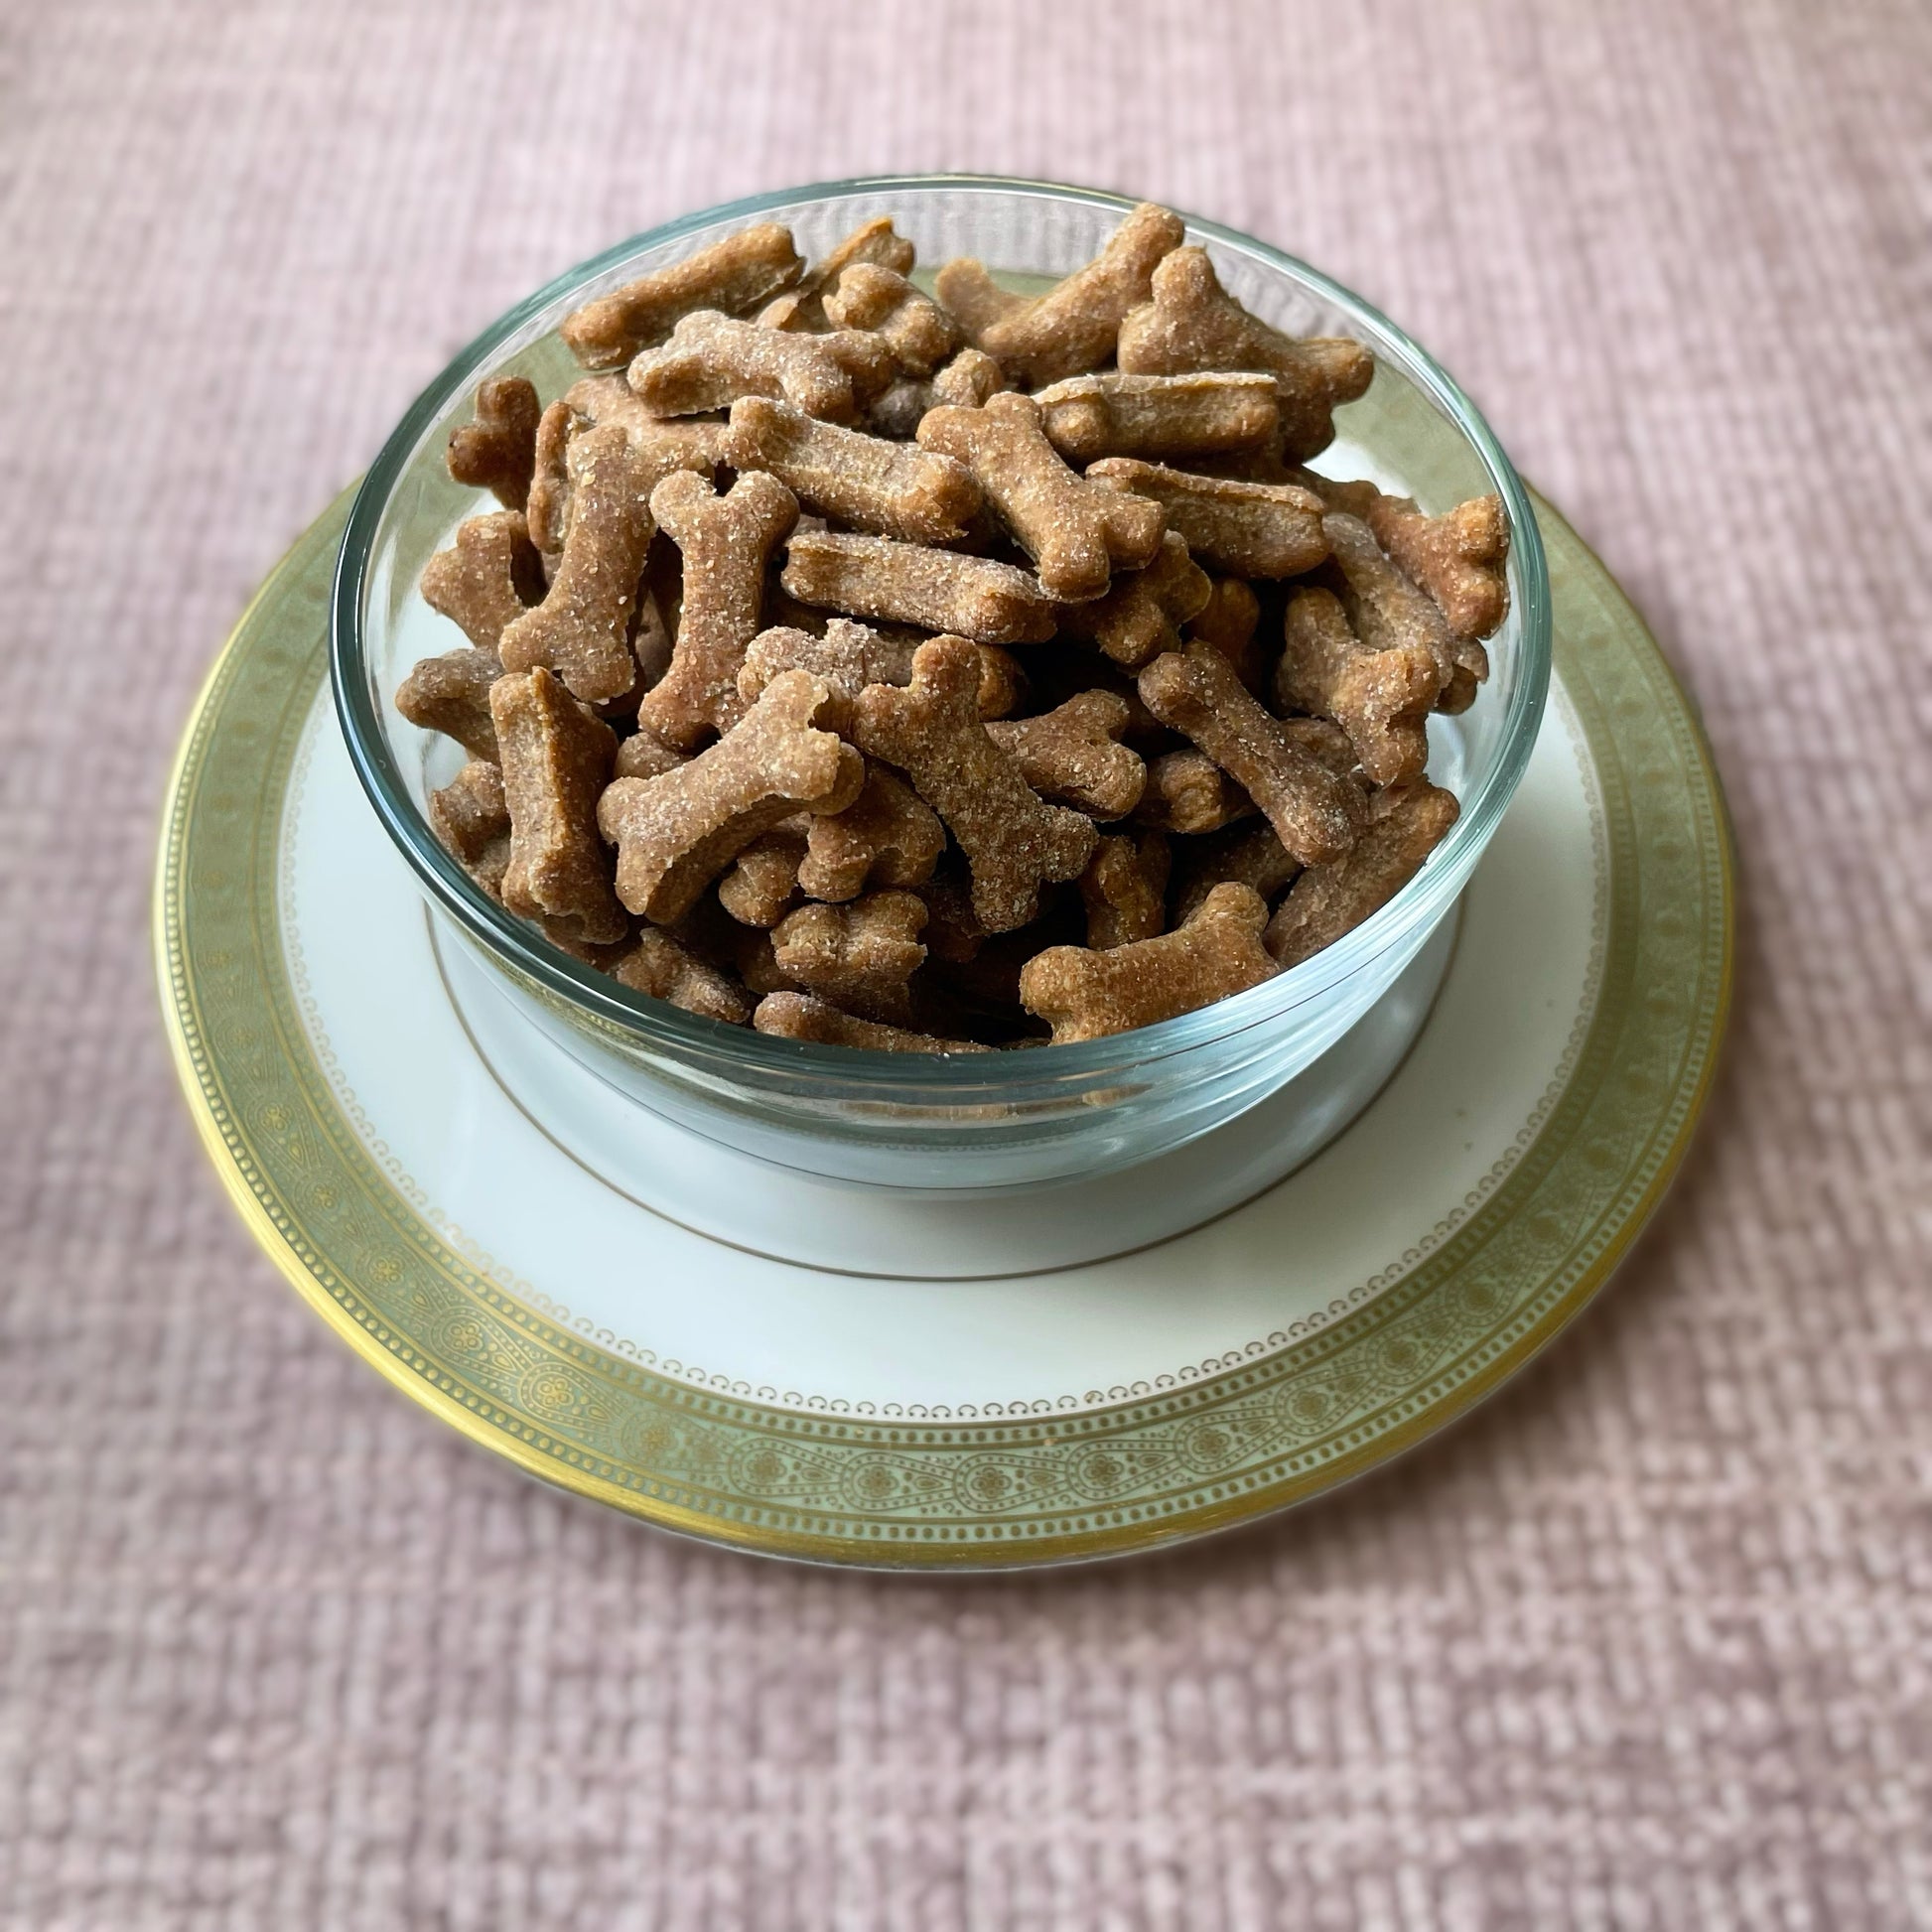 A glass bowl containing tiny peanut butter dog cookies in the shape of dog bones.